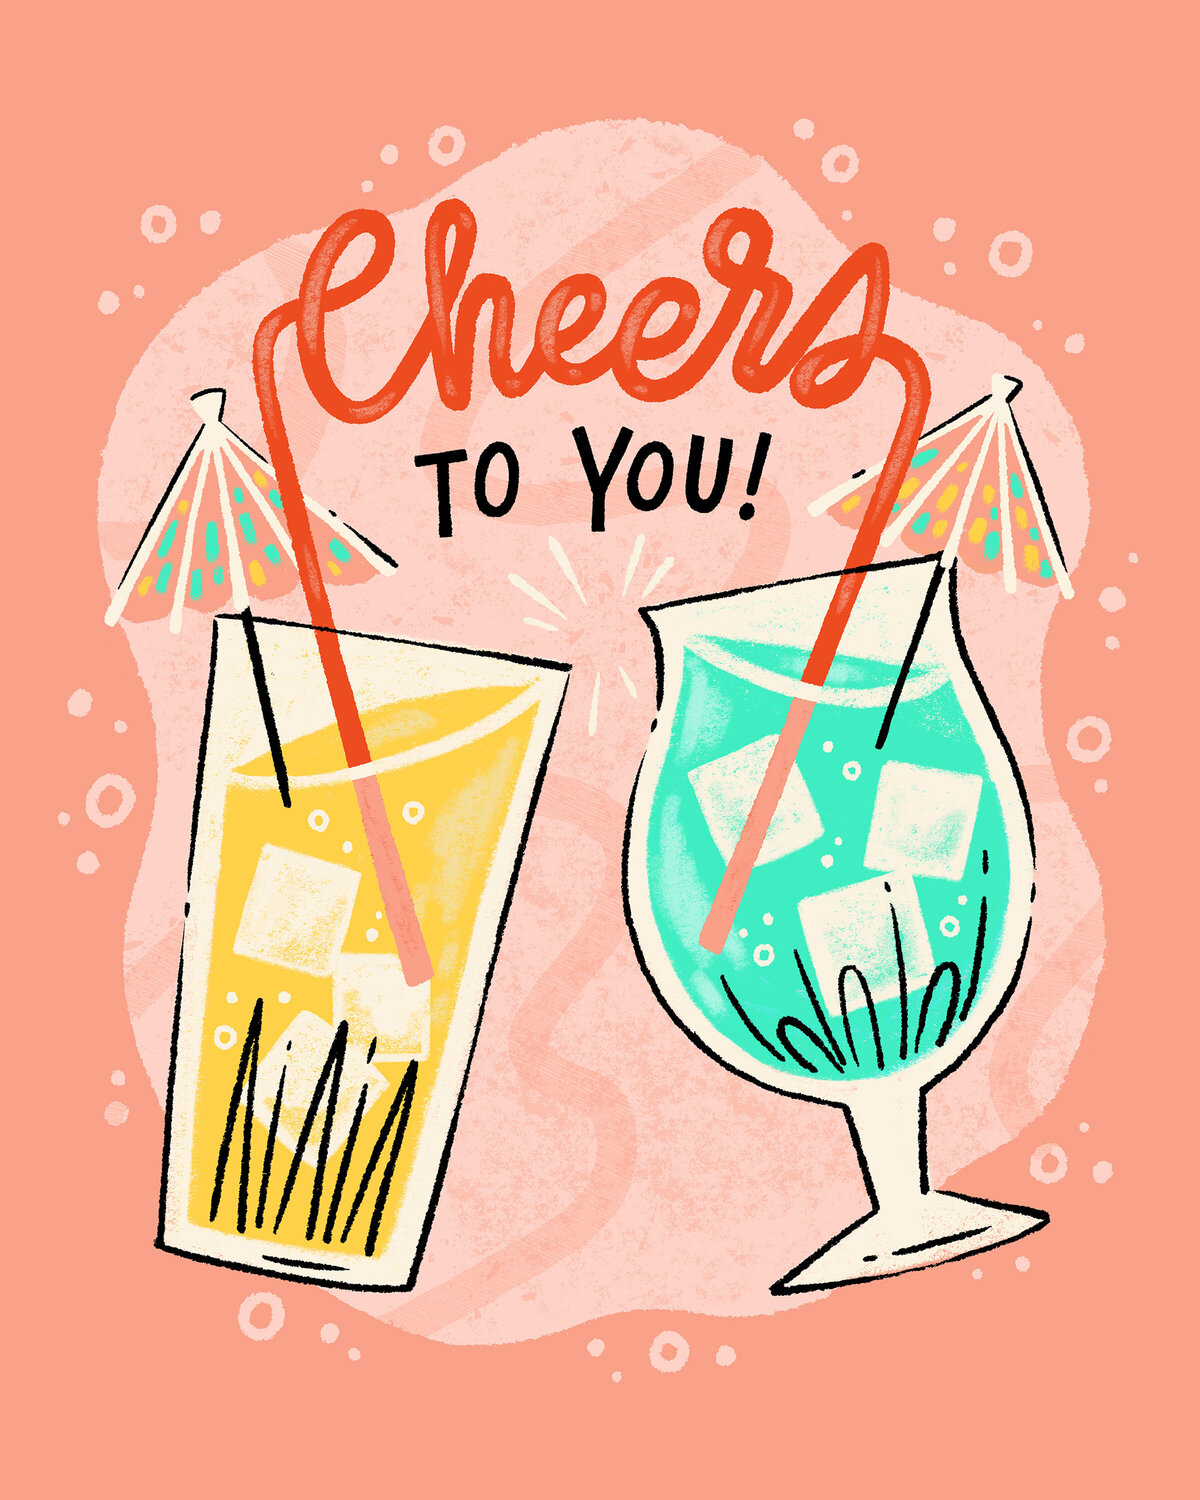 Cheers to You